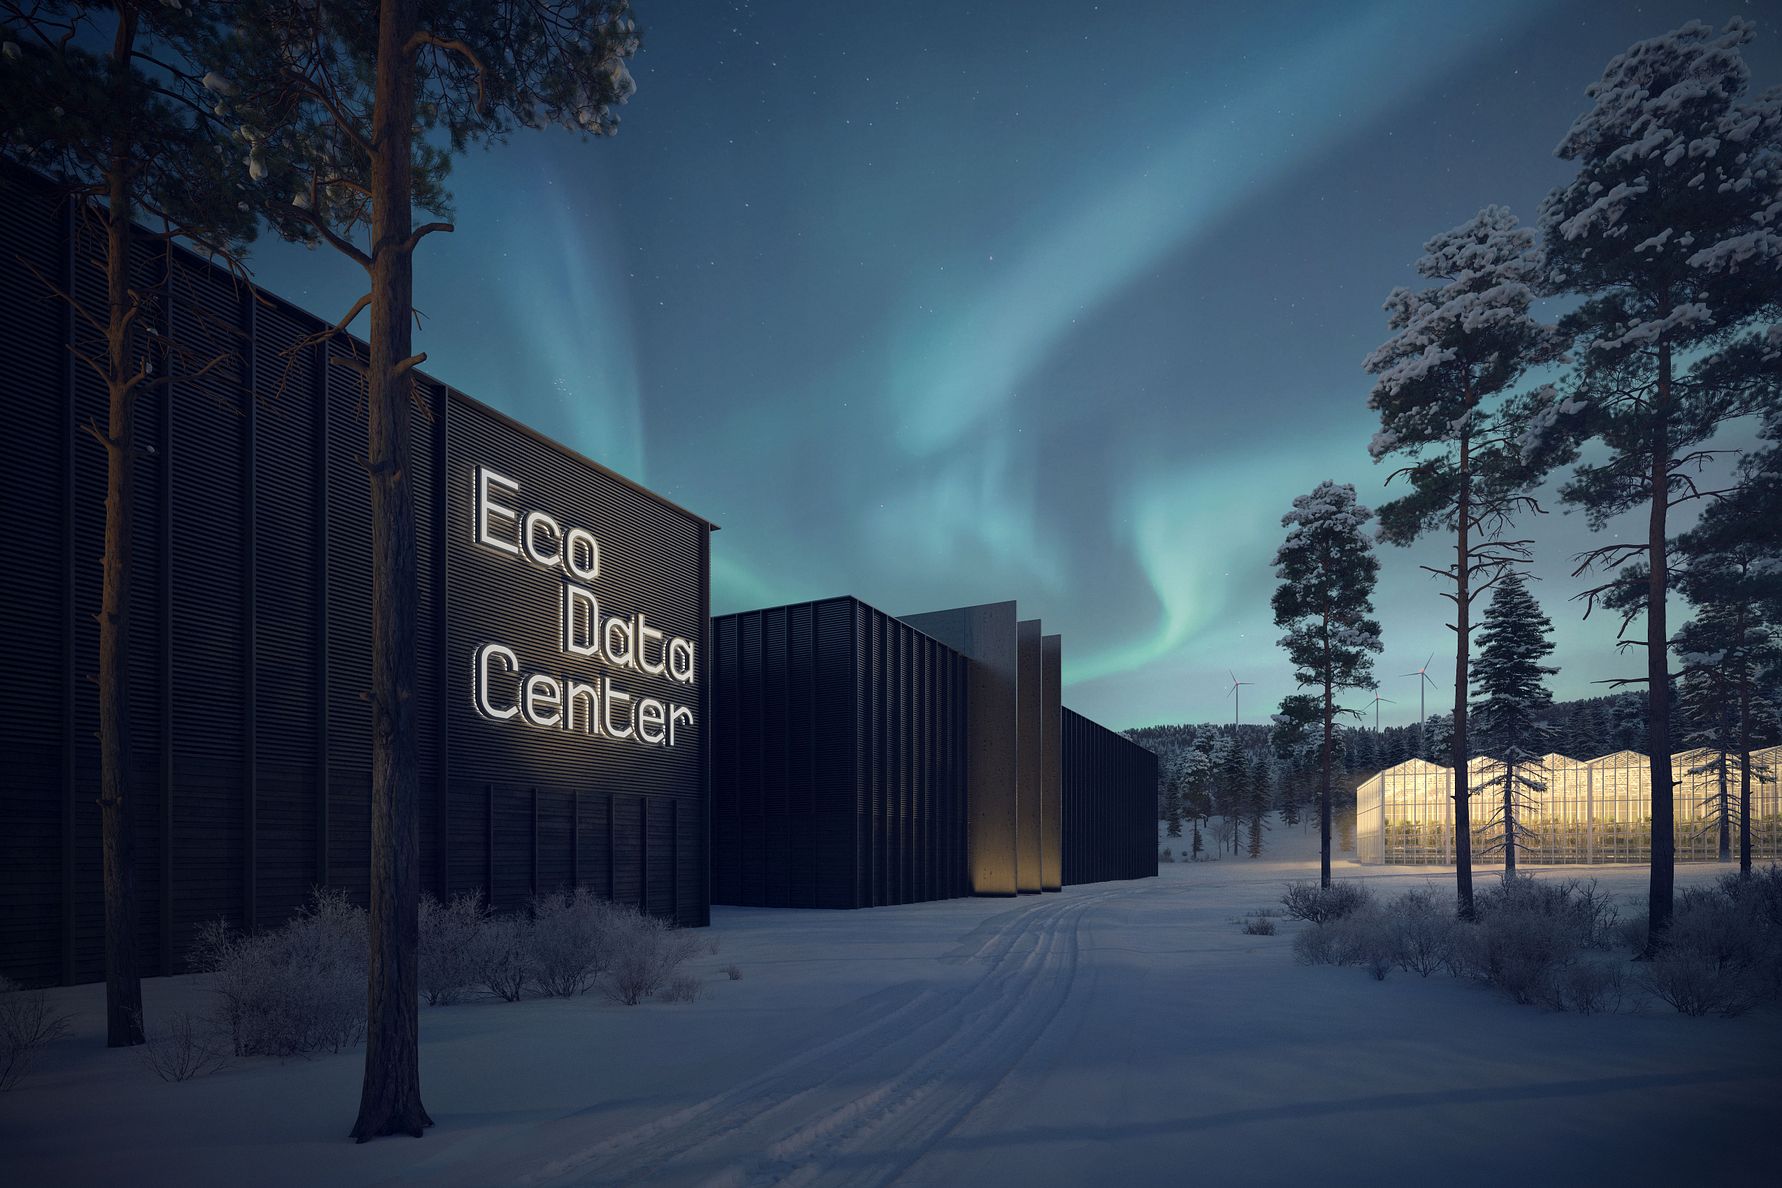 EcoDataCenter backed by EUR 446 million from its owner to fuel growth plans